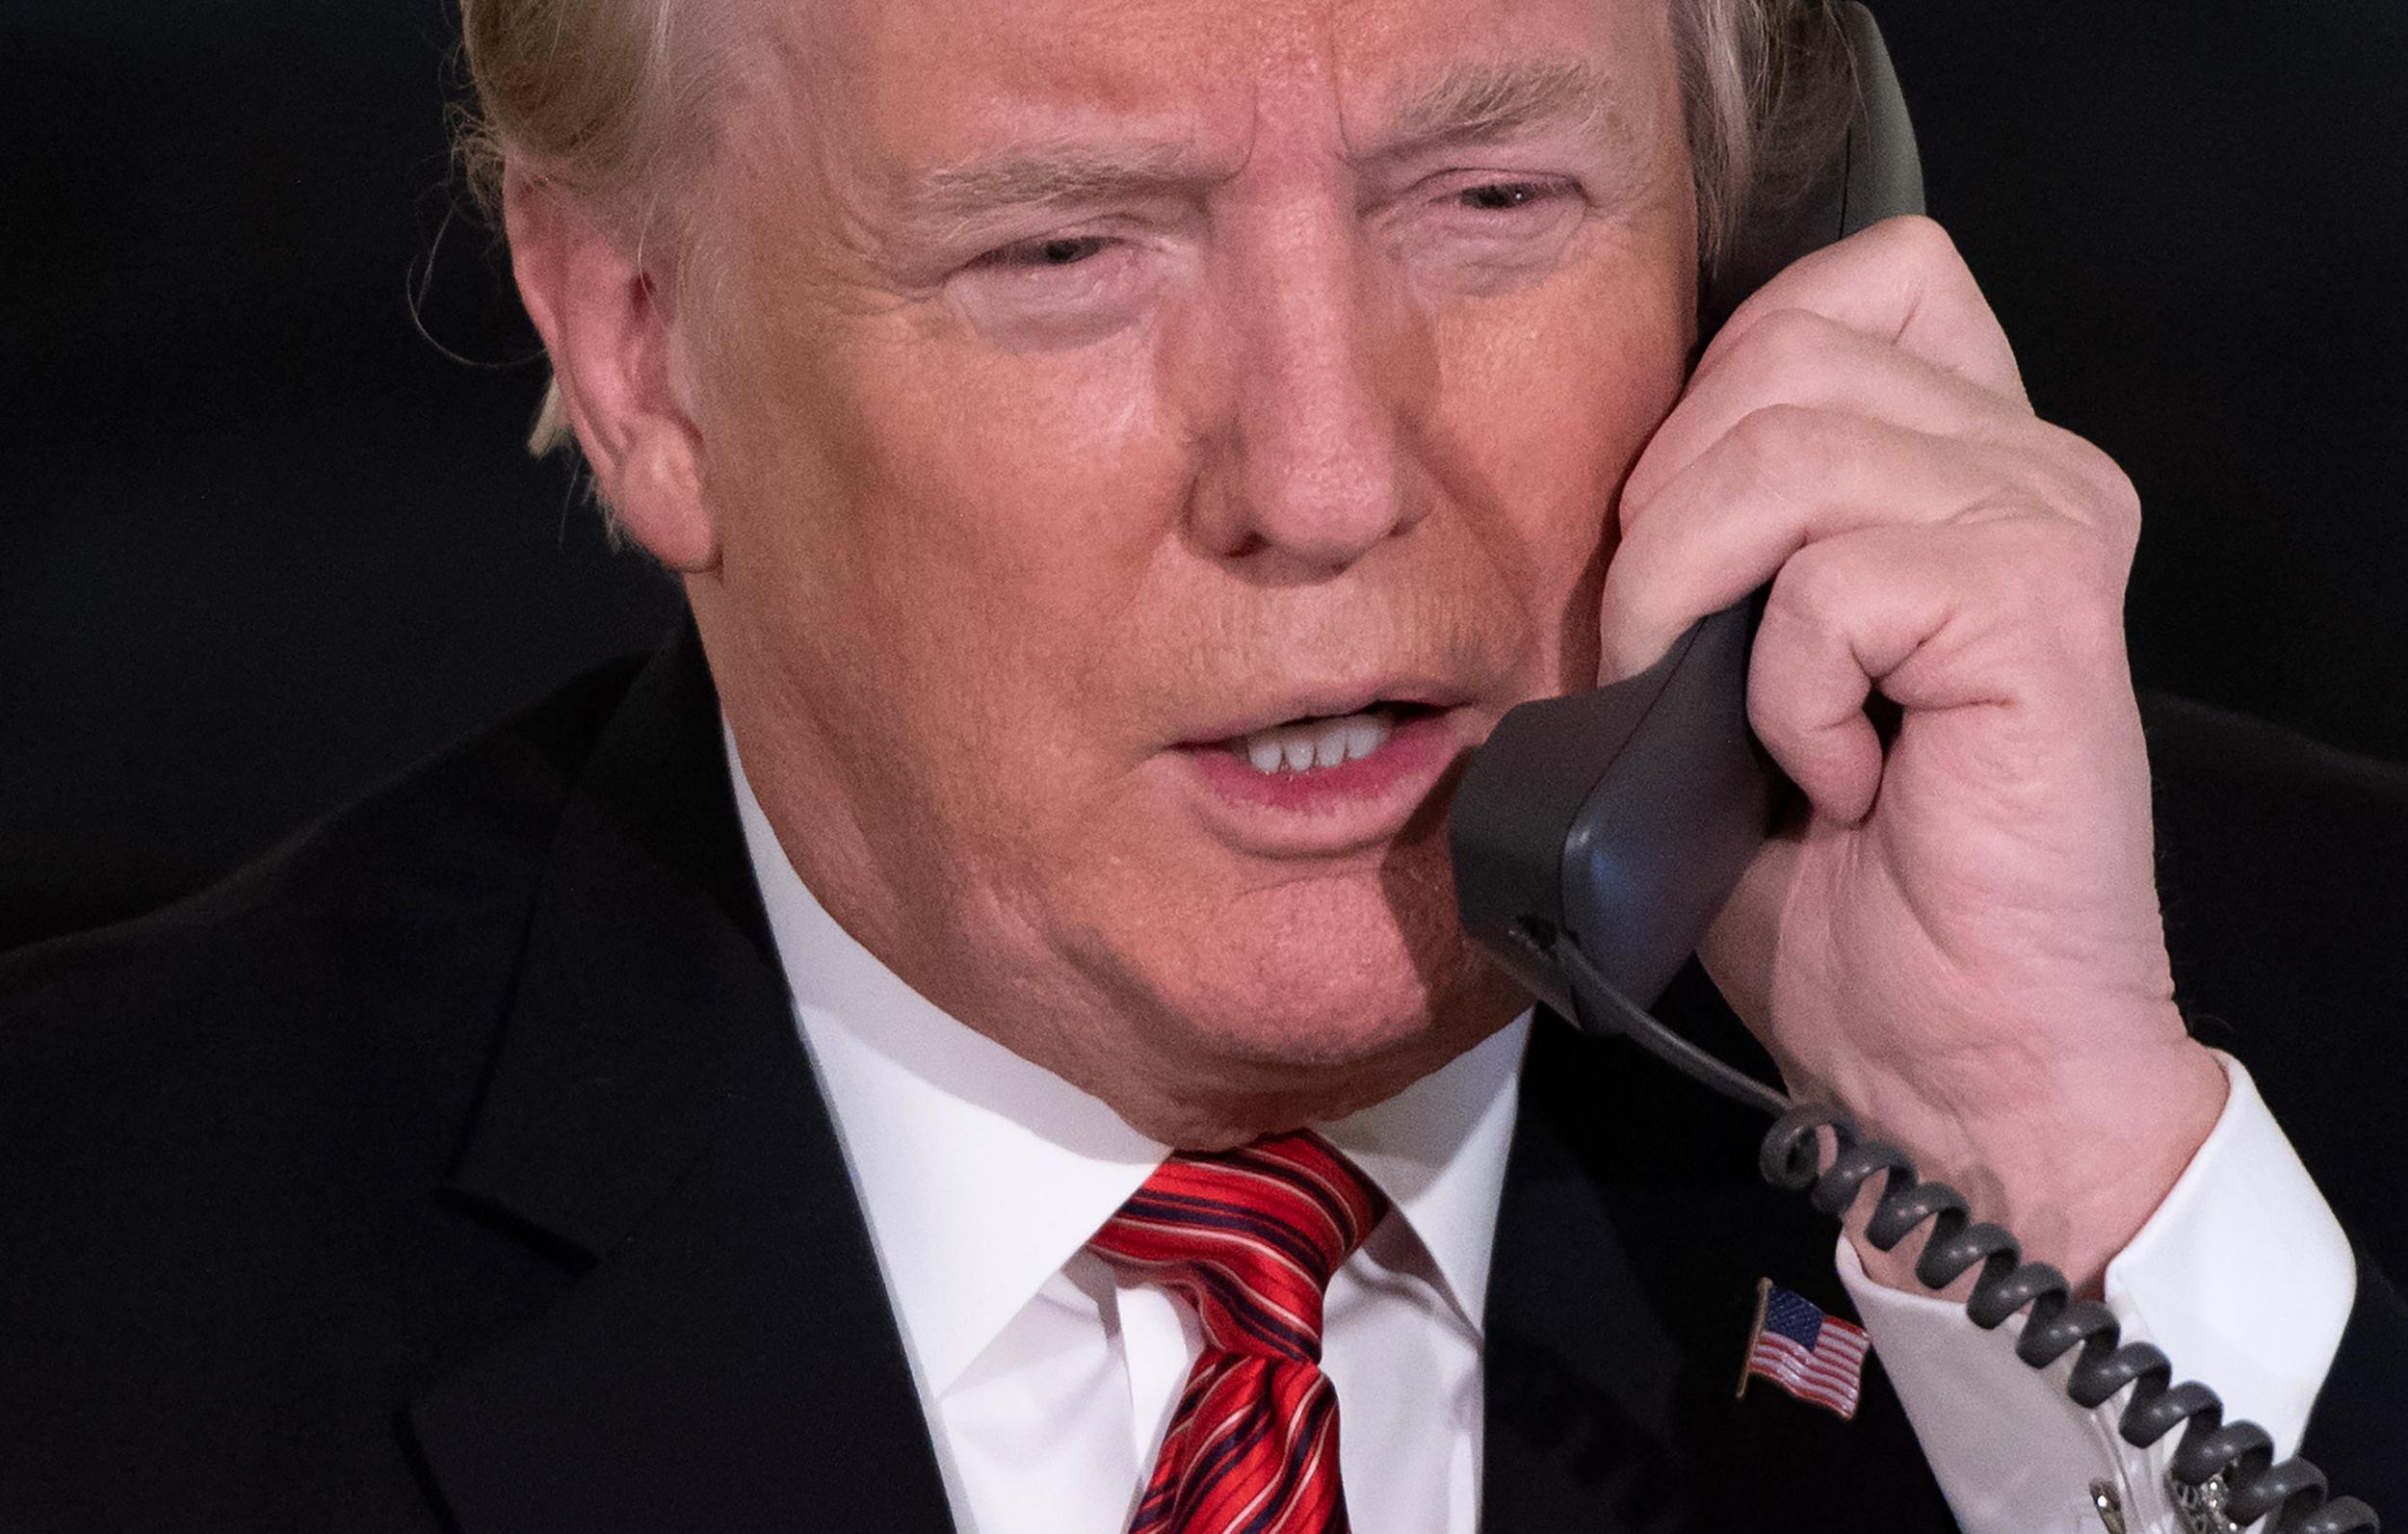 Trump lied about phone call with China at G7, White House aides admit